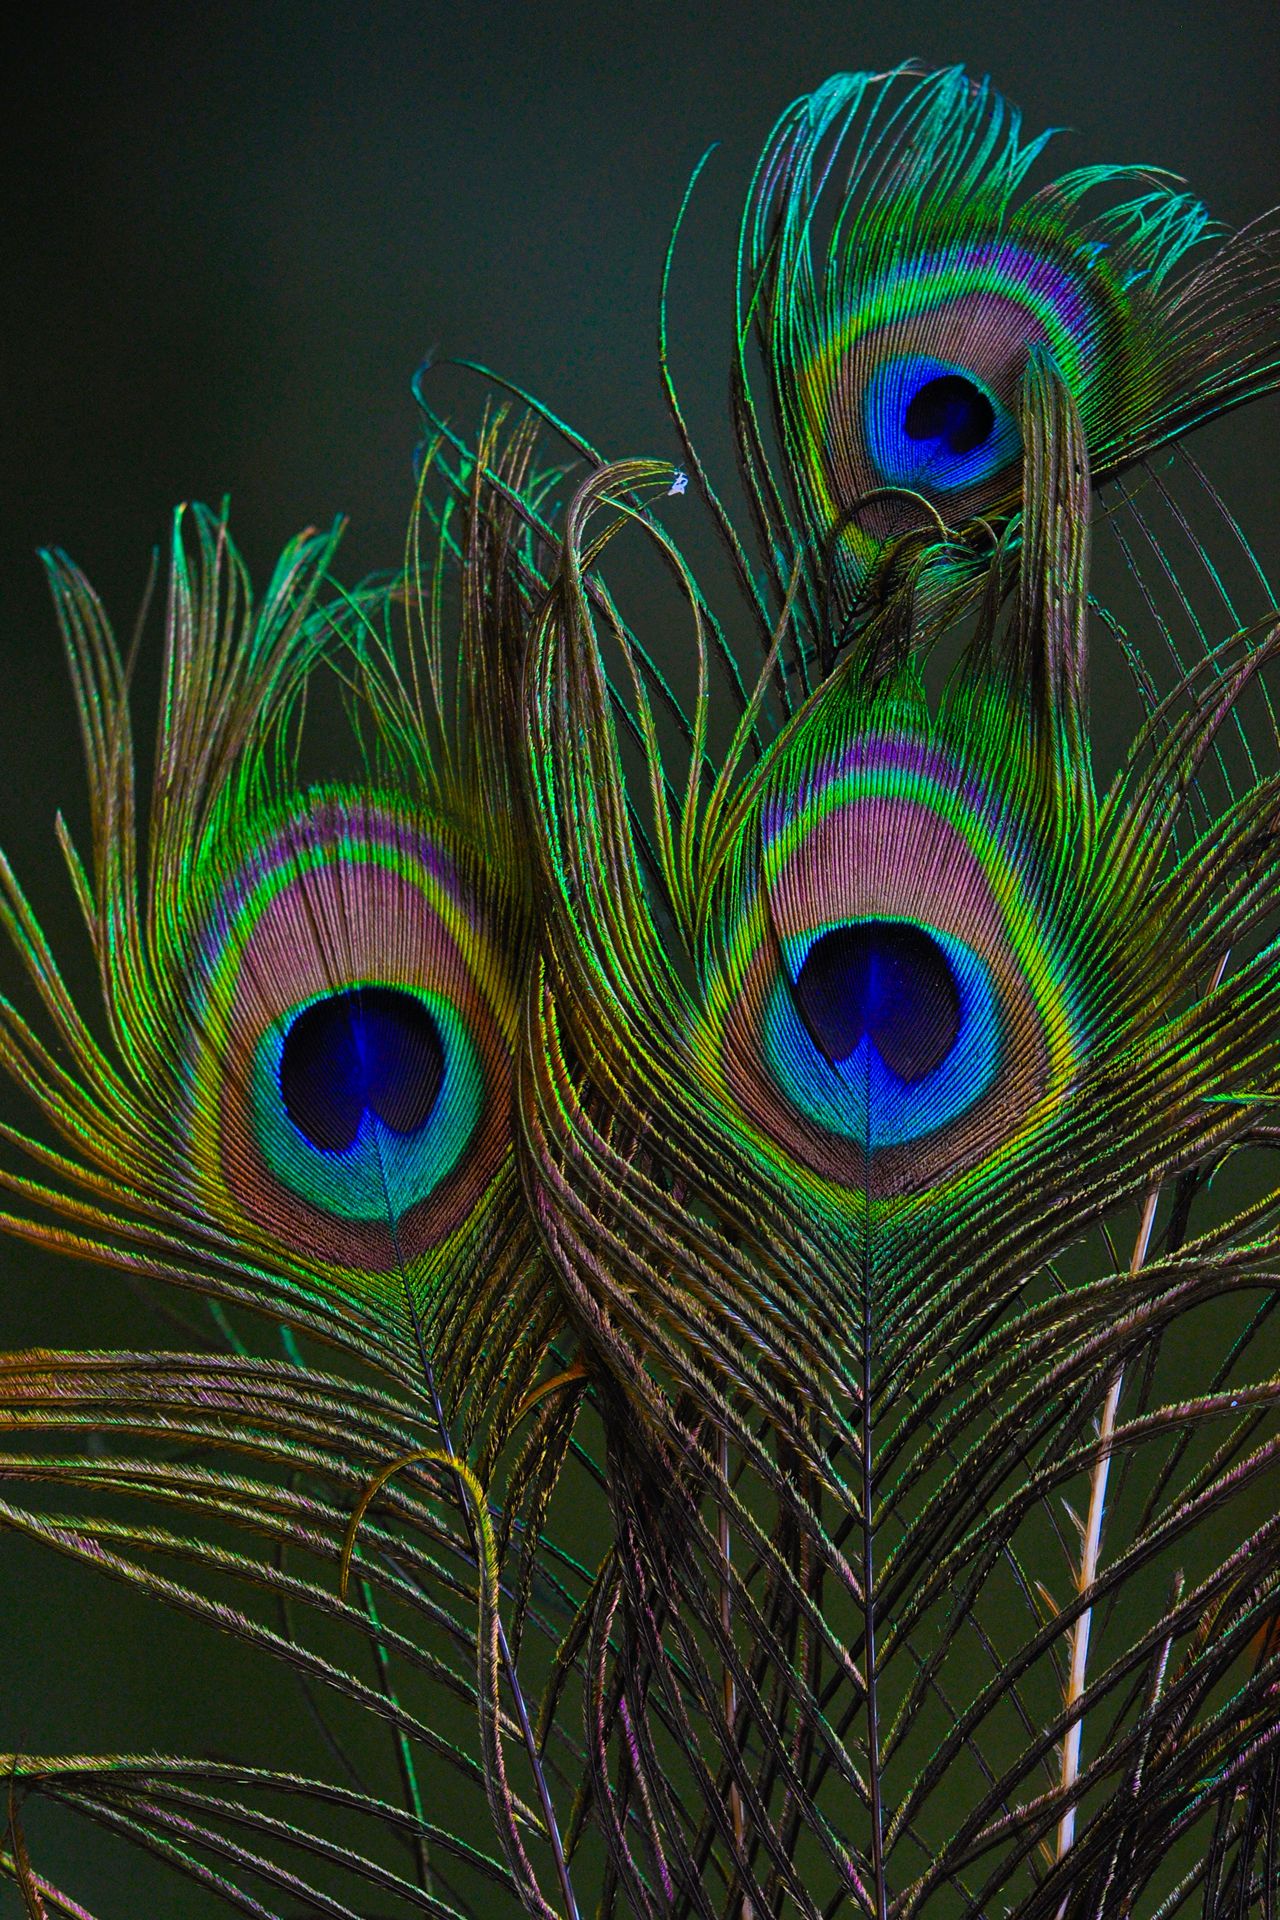 Wallpapers Of A Peacock - Wallpaper Cave